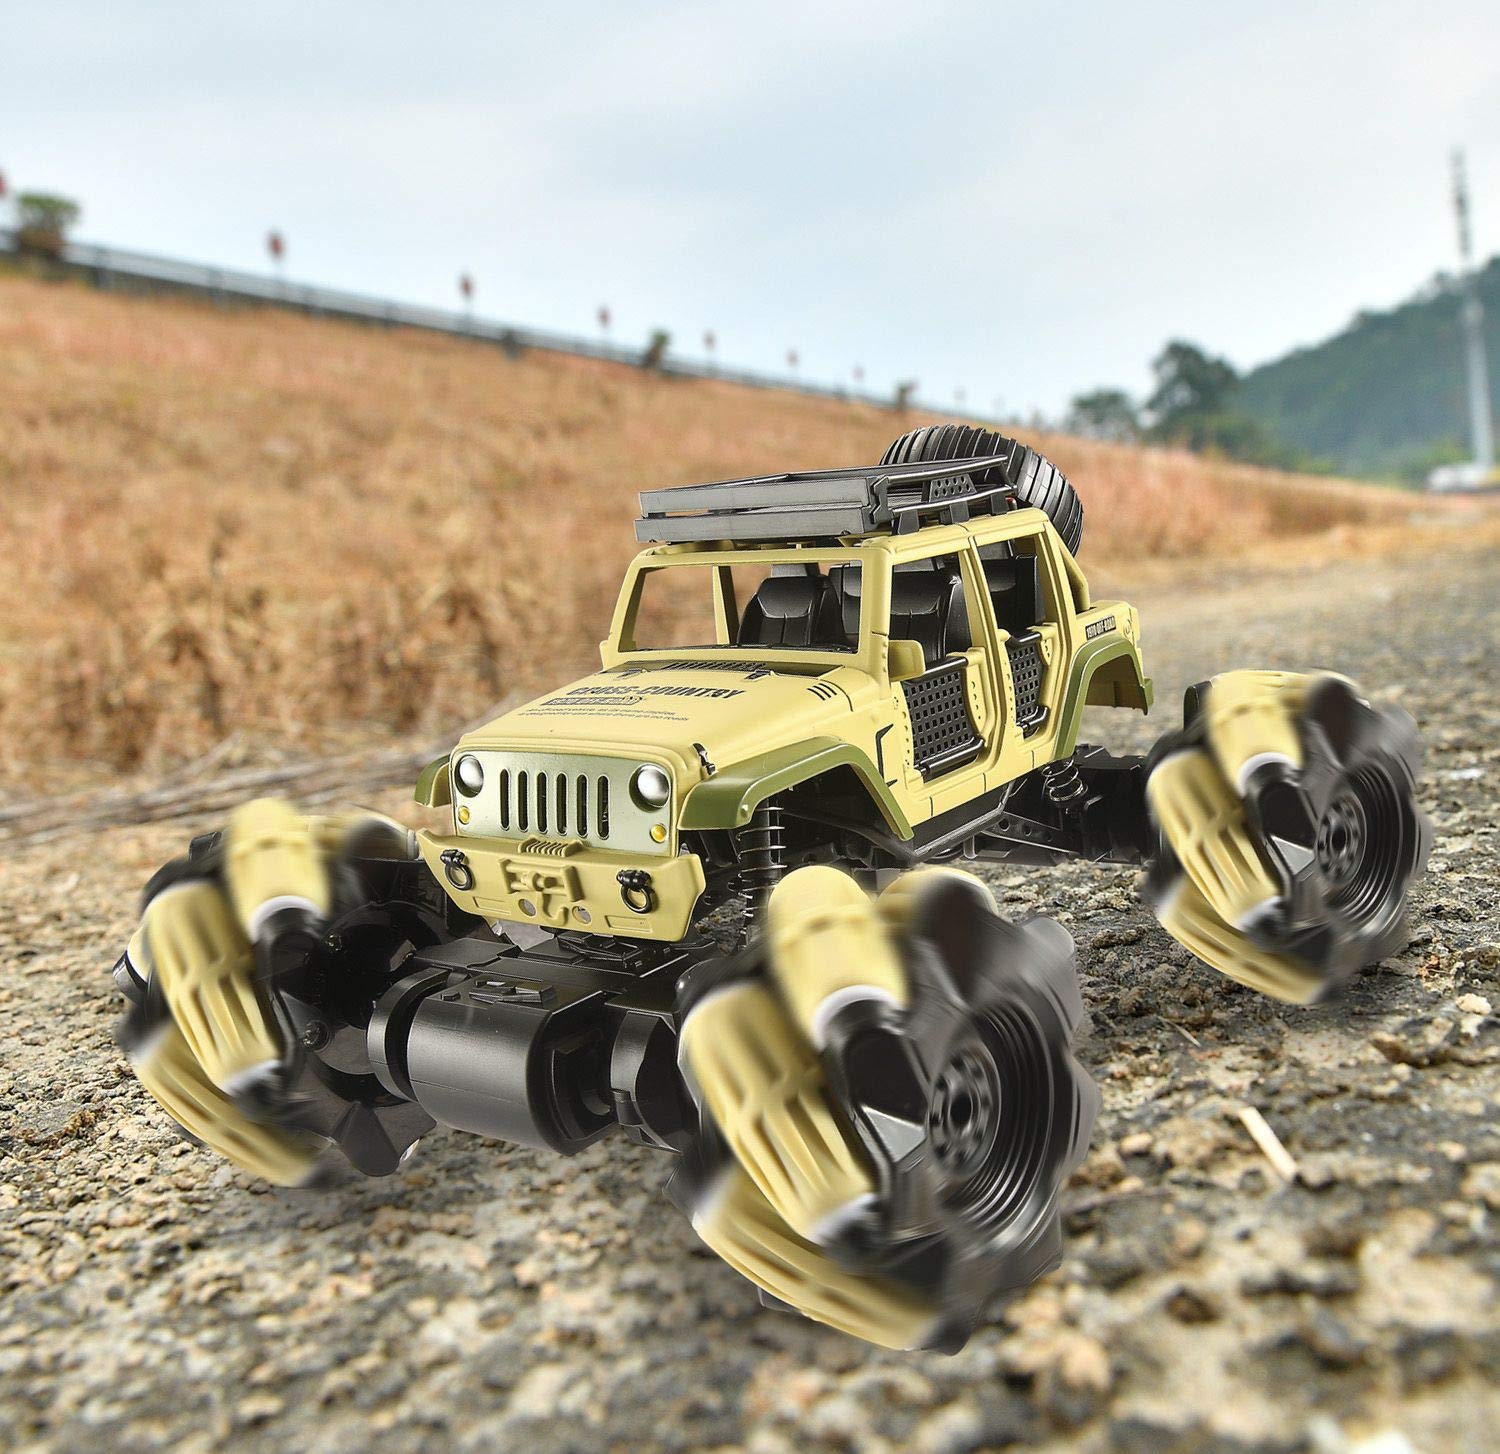 LOOZIX Remote Control Car, 1:16 Metal Drift RC Cars 360° Rotating 4WD 2.4Ghz Gesture Sensor Control Monster Truck for Kids All Terrains Crawler RC Vehicle Rechargeable Batteries for Boys Kids